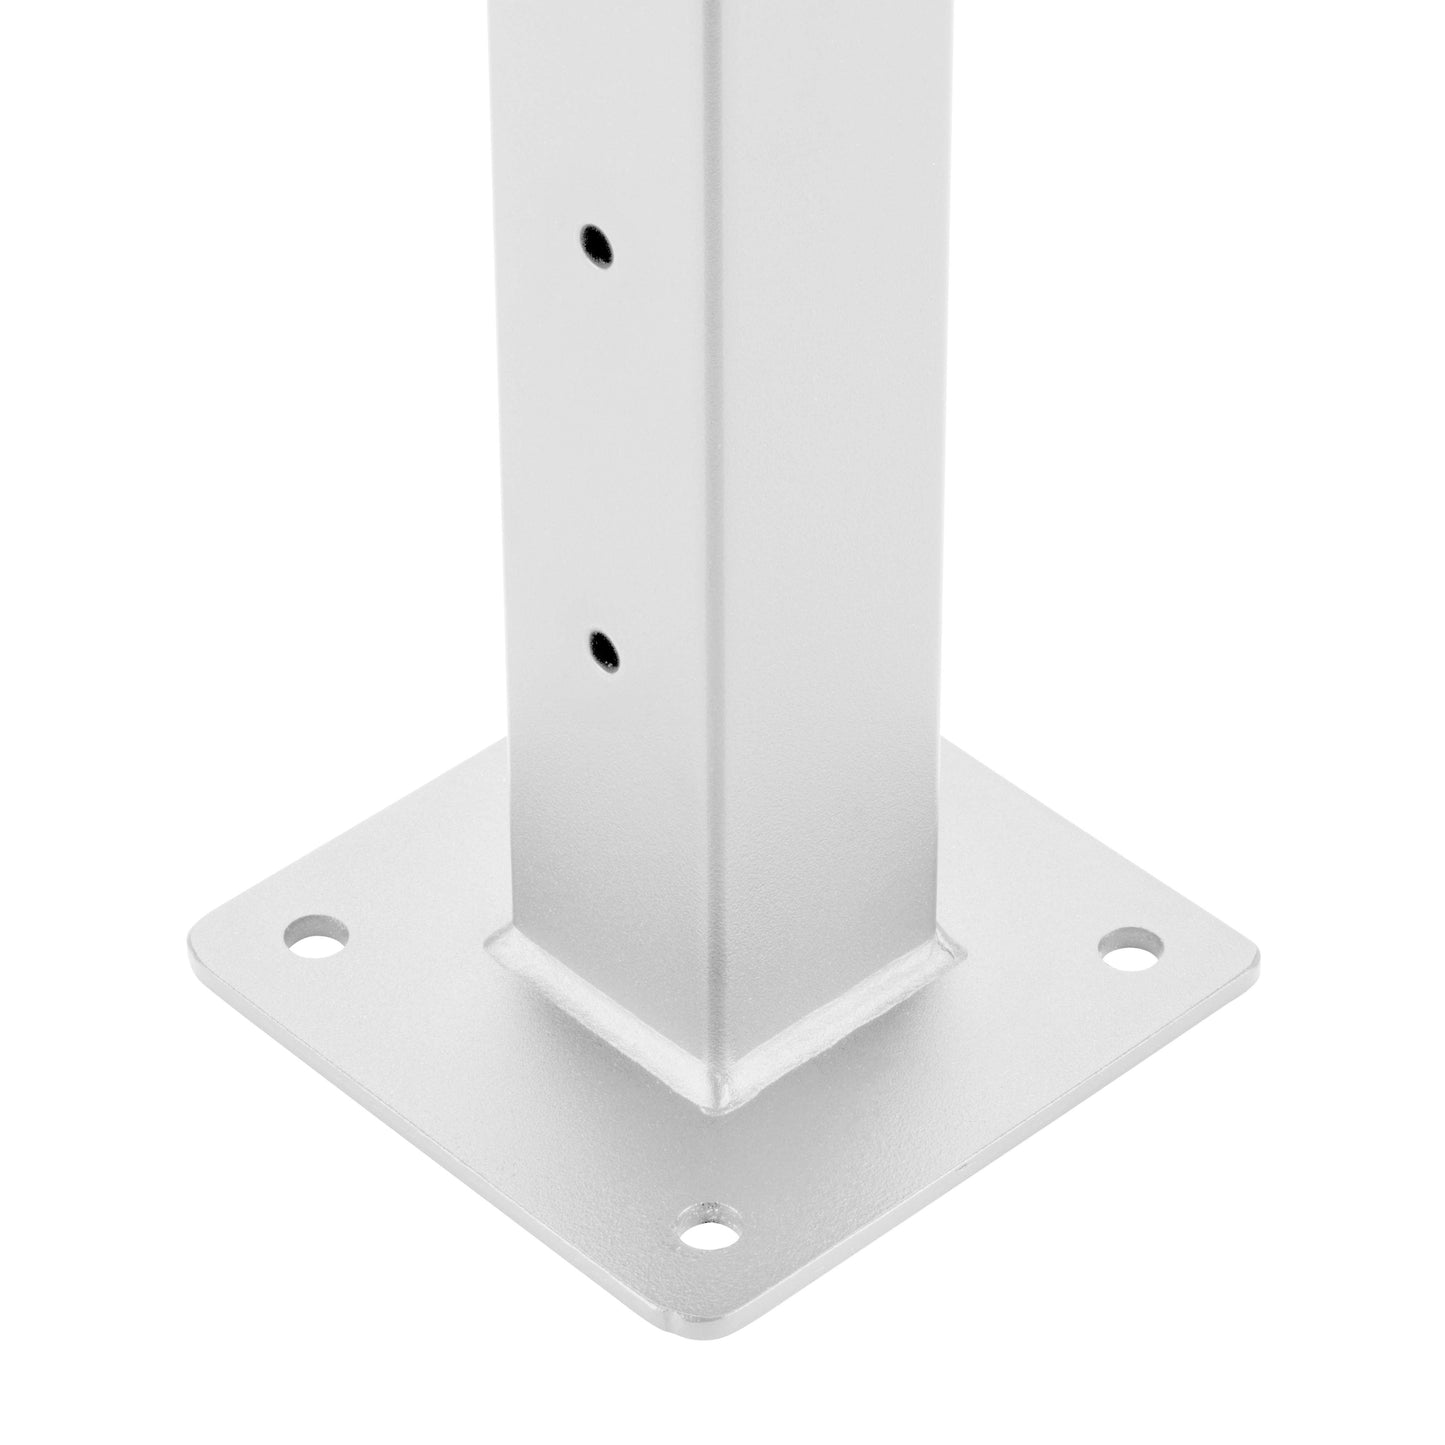 64 ft. x 42 in. White Deck Cable Railing, Base Mount